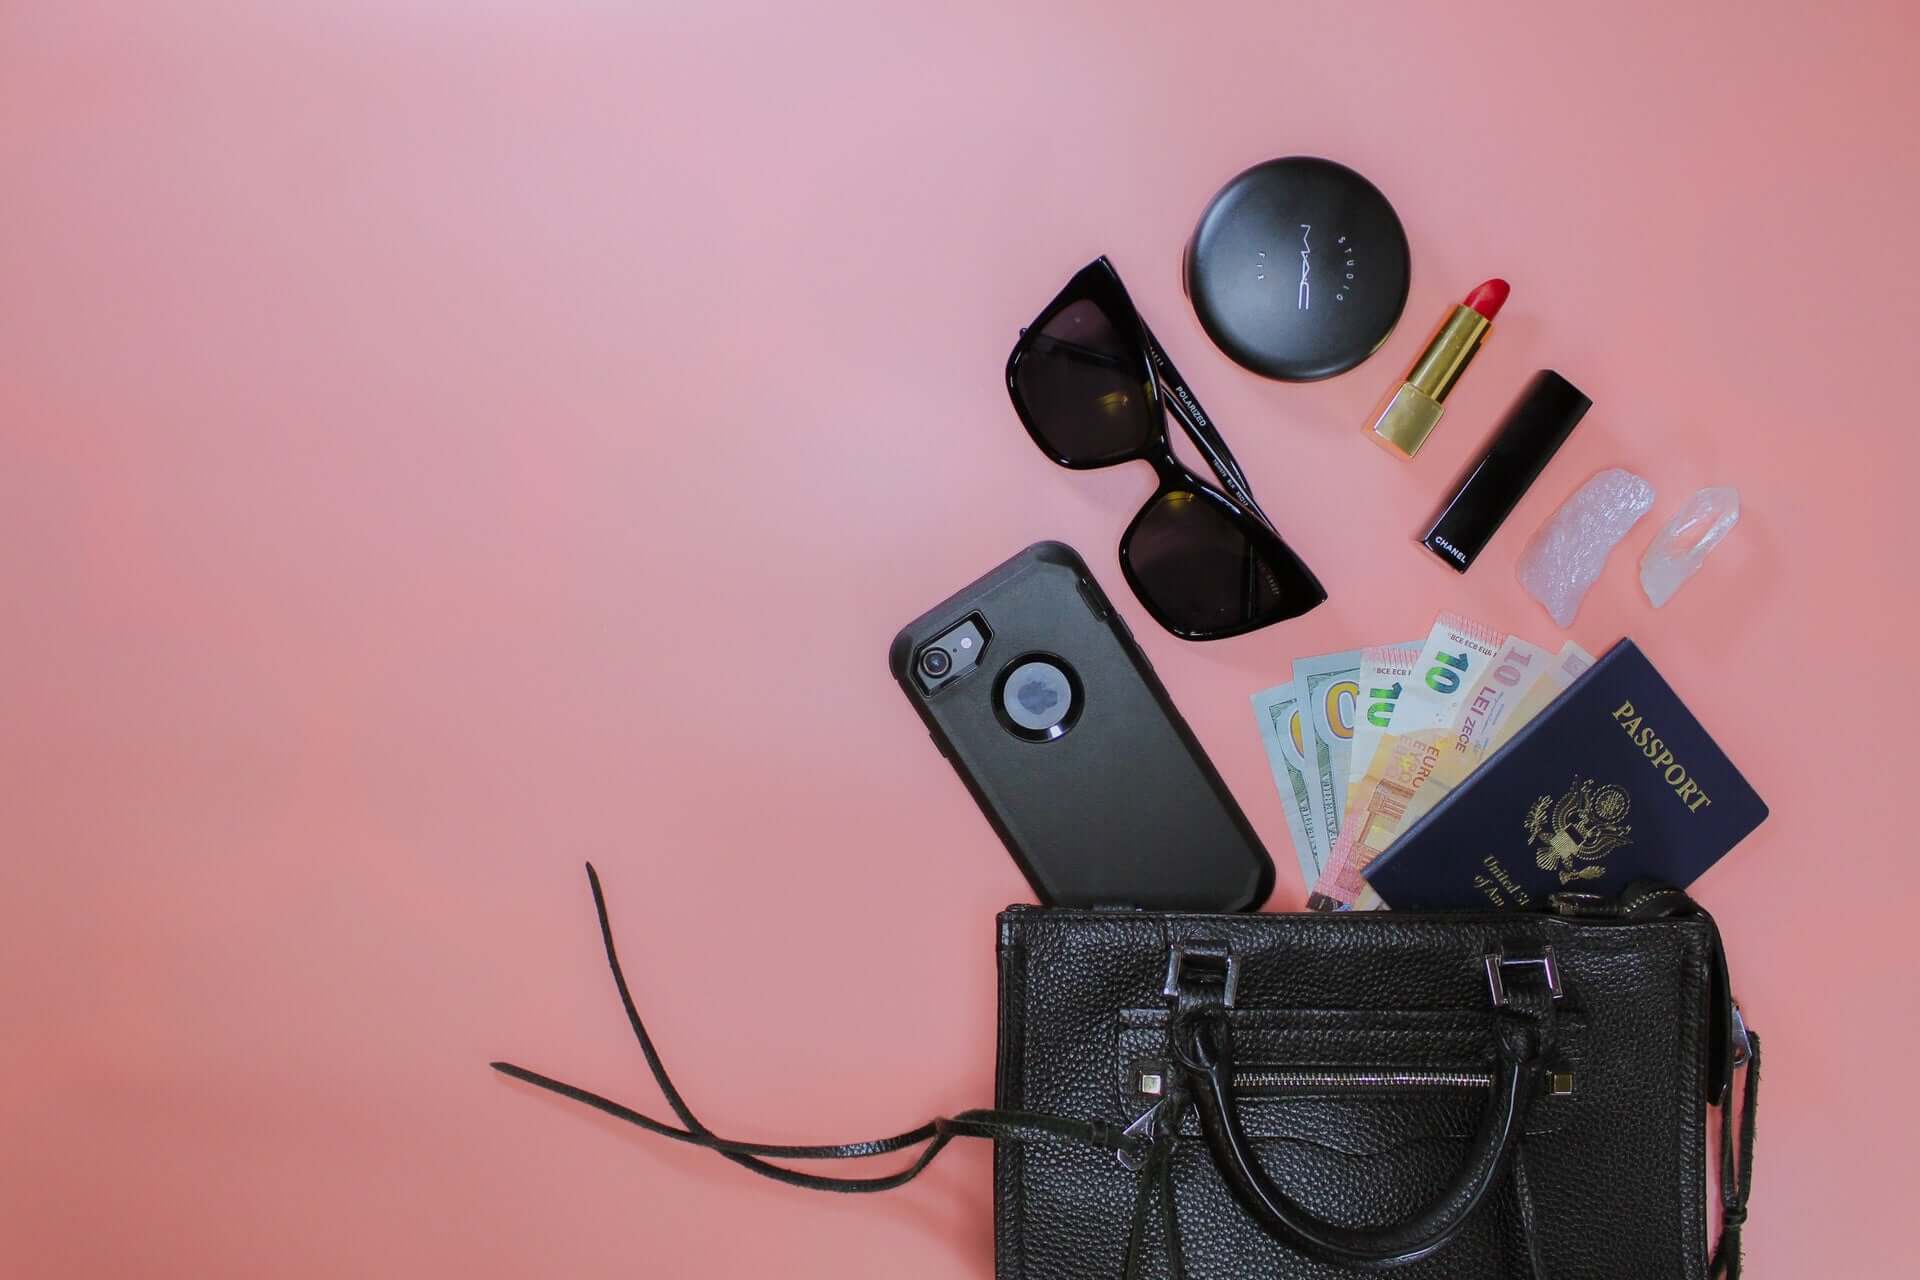 A black leather purse spills its contents - including sunglasses, a cellphone, a passport, and various makeup products - on a pink background.